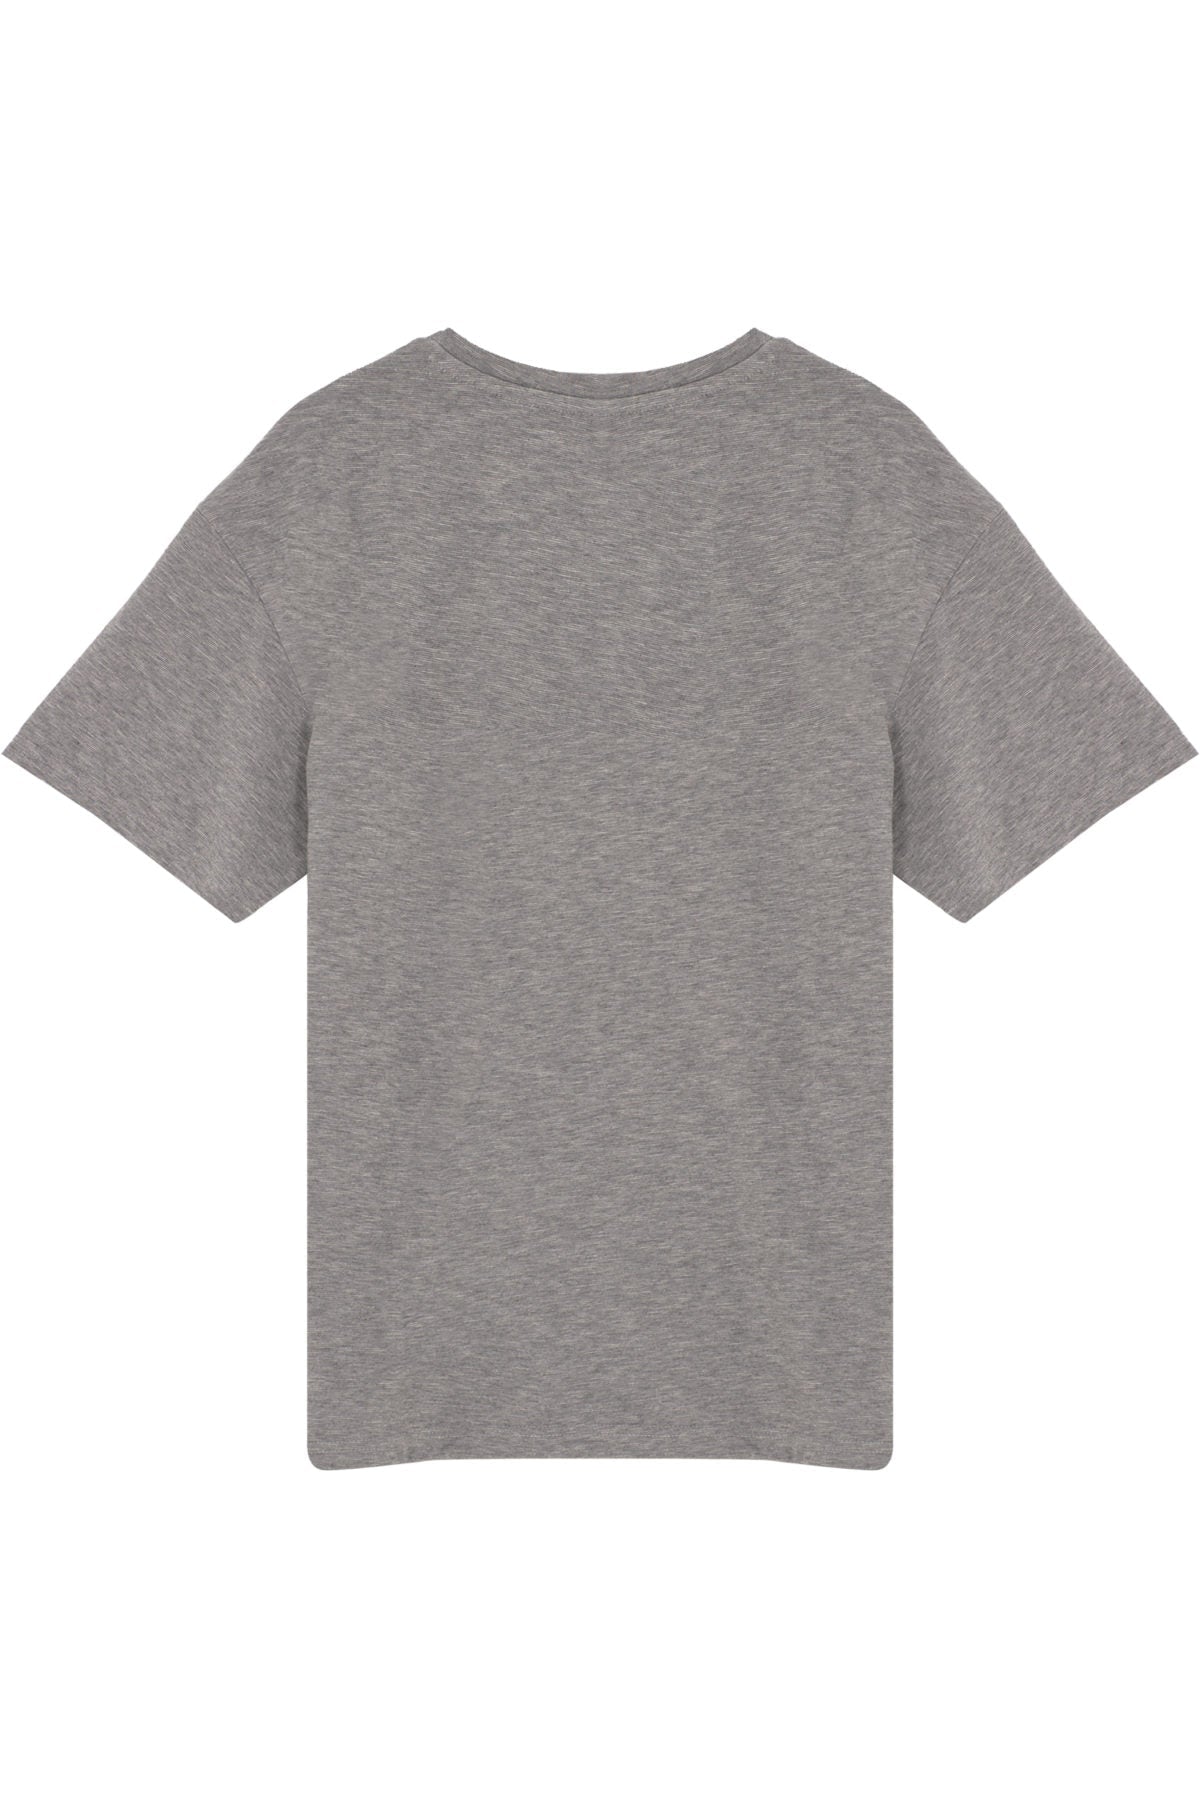 Load image into Gallery viewer, High Density T-Shirt - Grey
